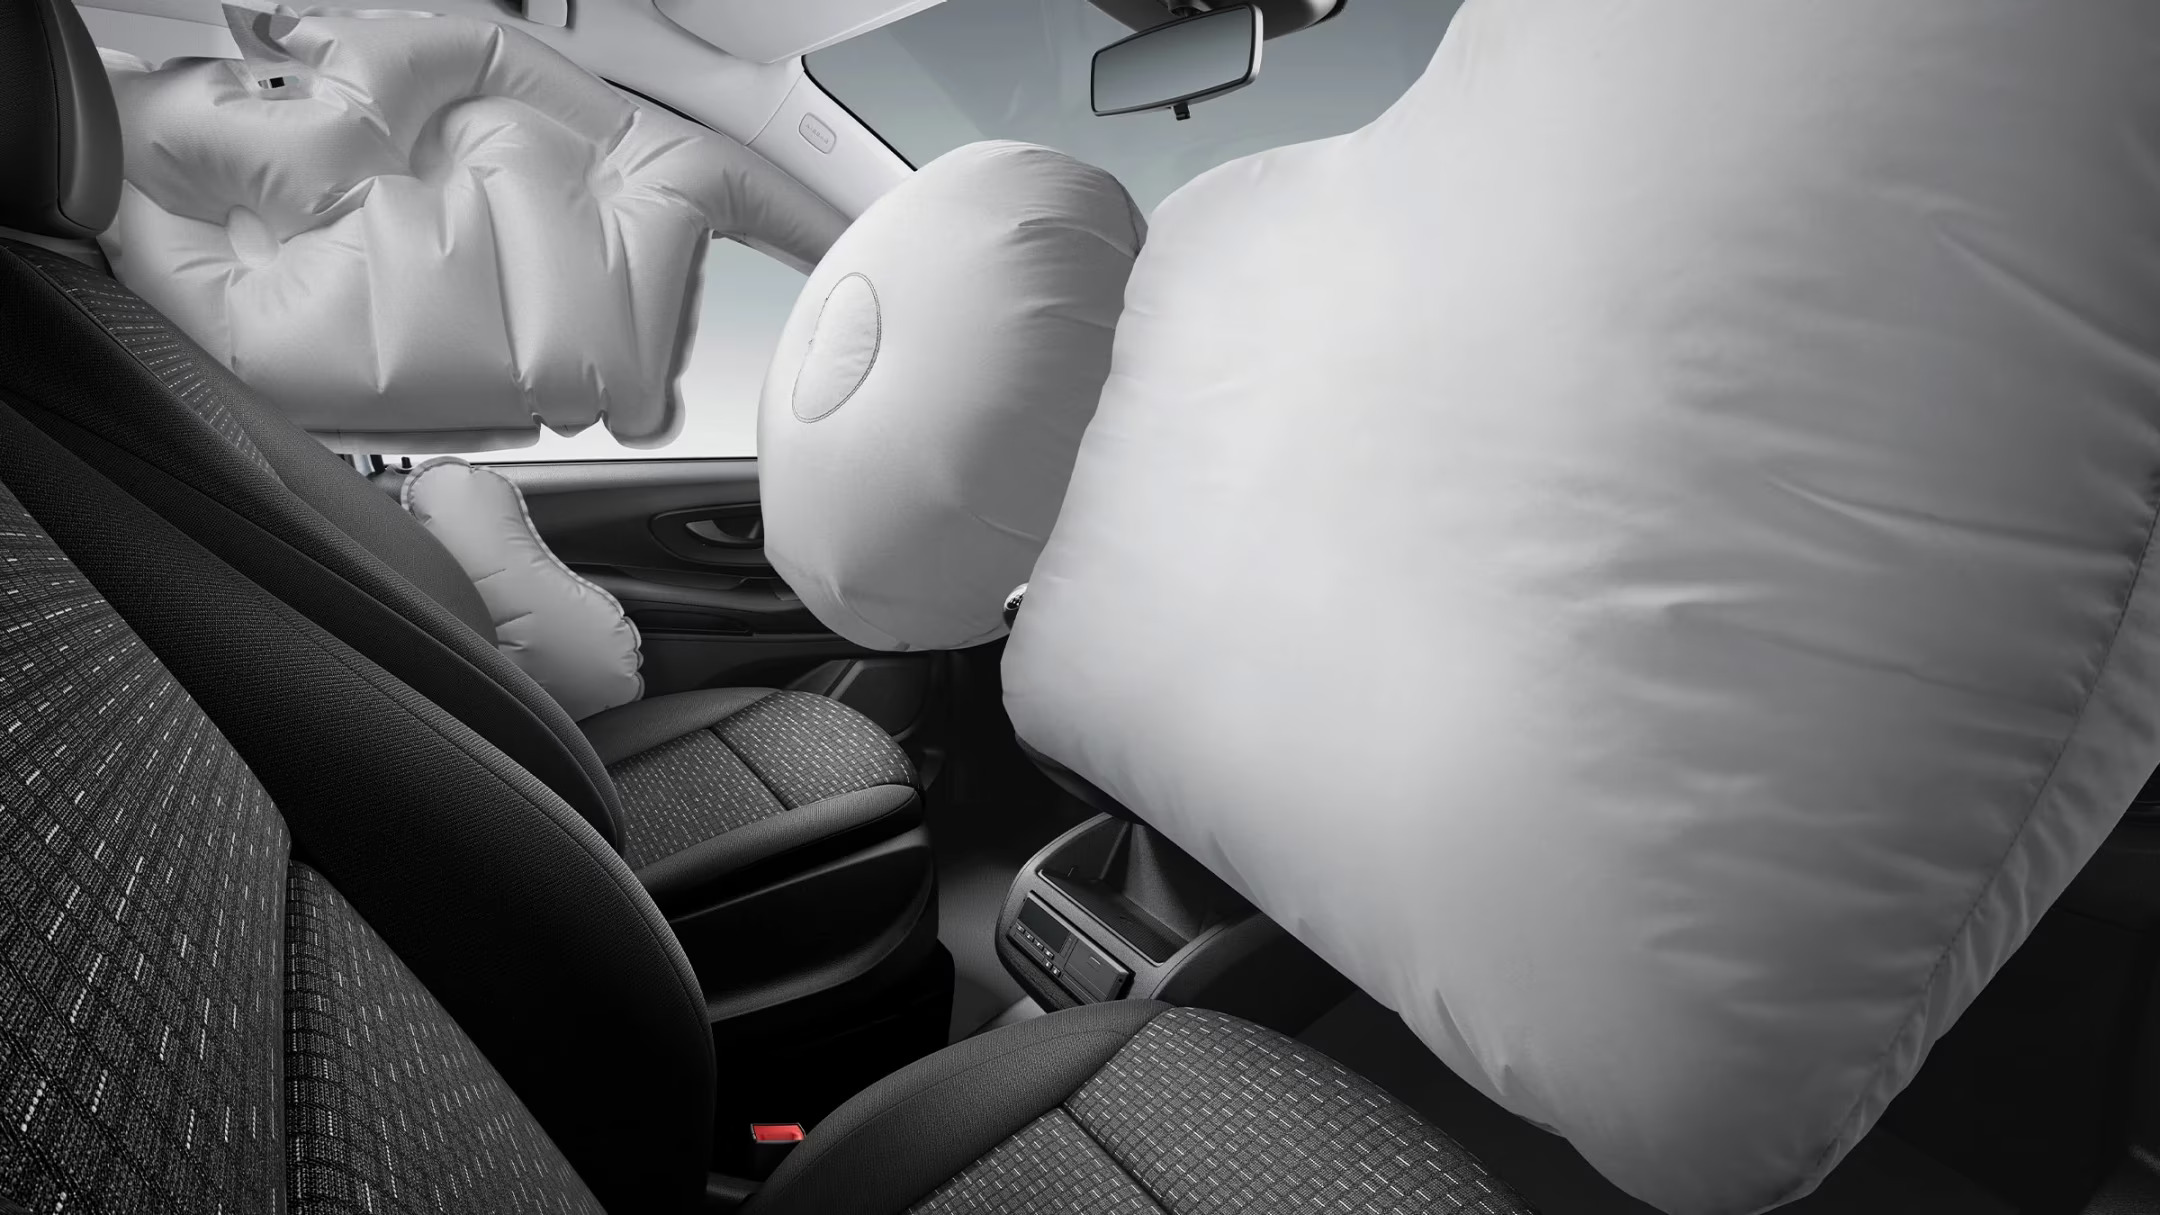 What Are Air Bags And How Do They Work?